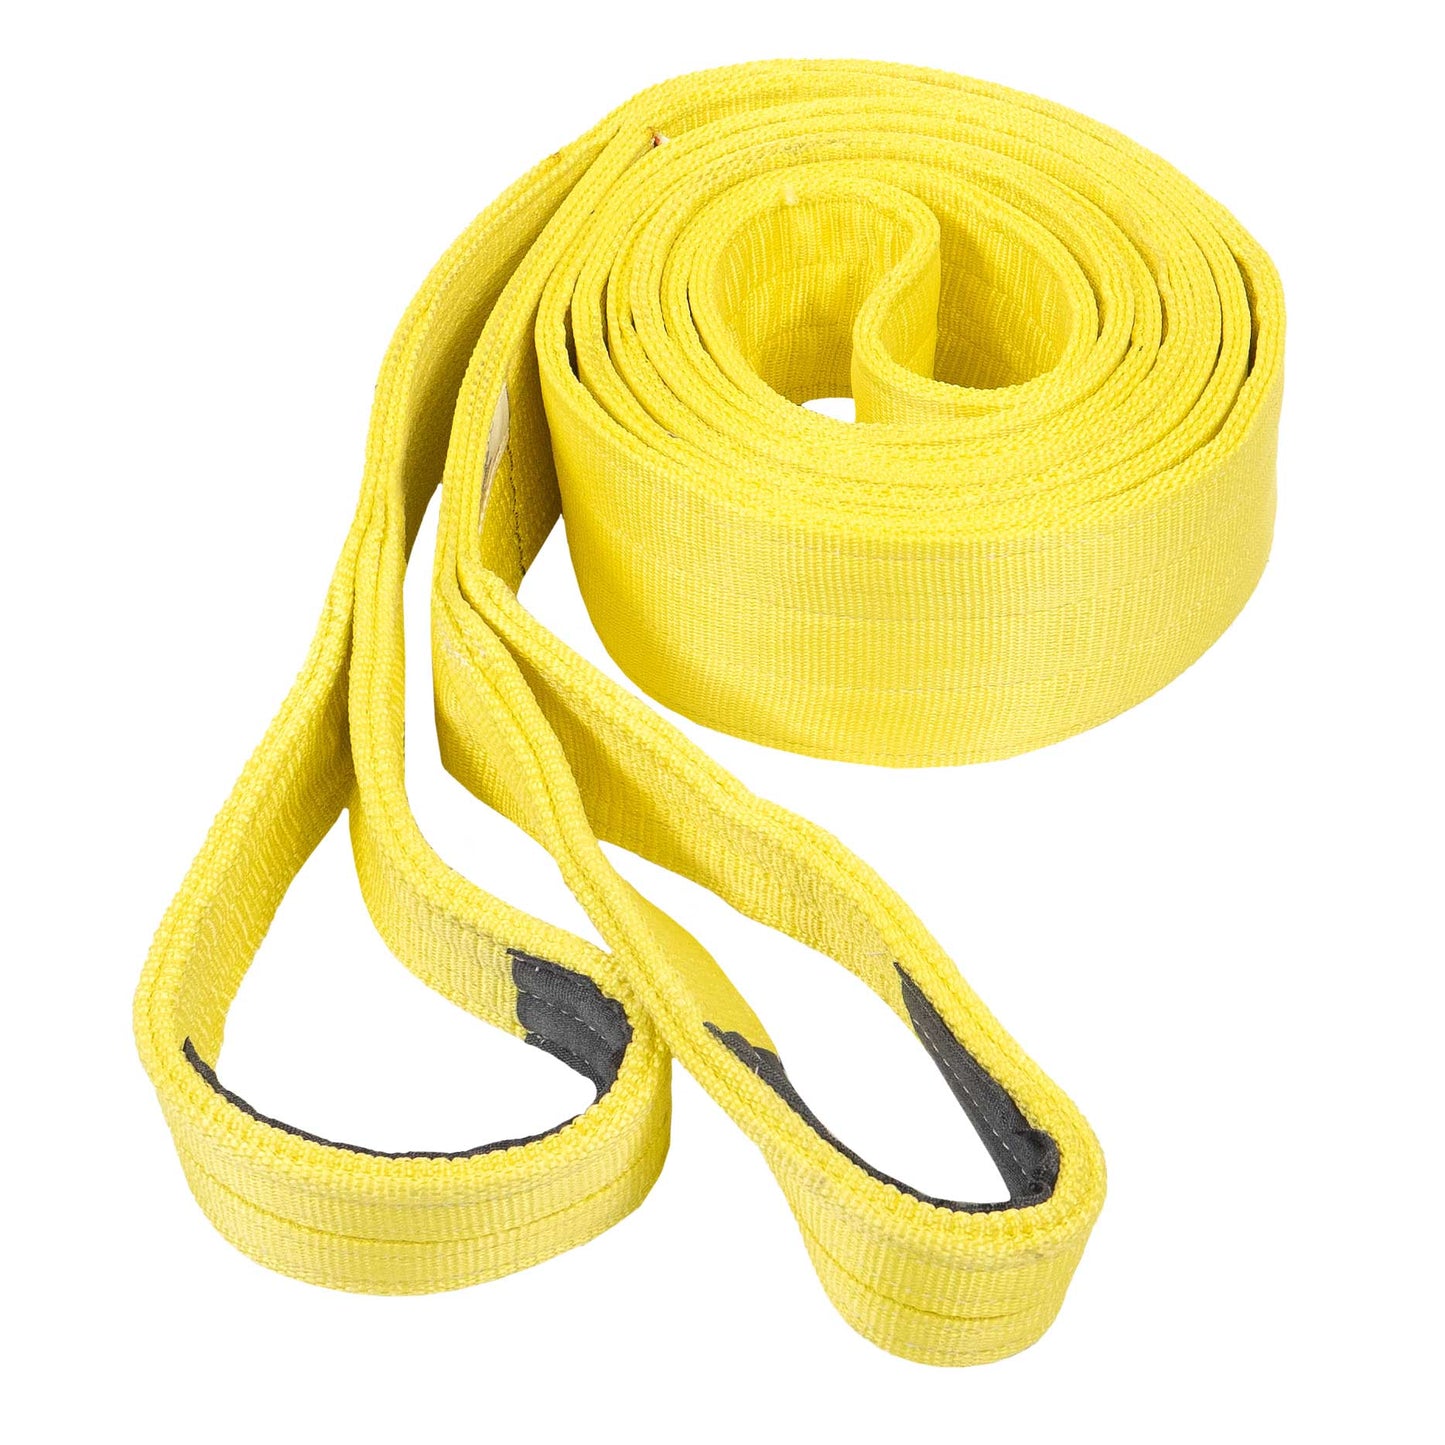 6" x 20' Heavy Duty Recovery Strap with Reinforced Cordura Eyes - 3 Ply | 57,250 WLL